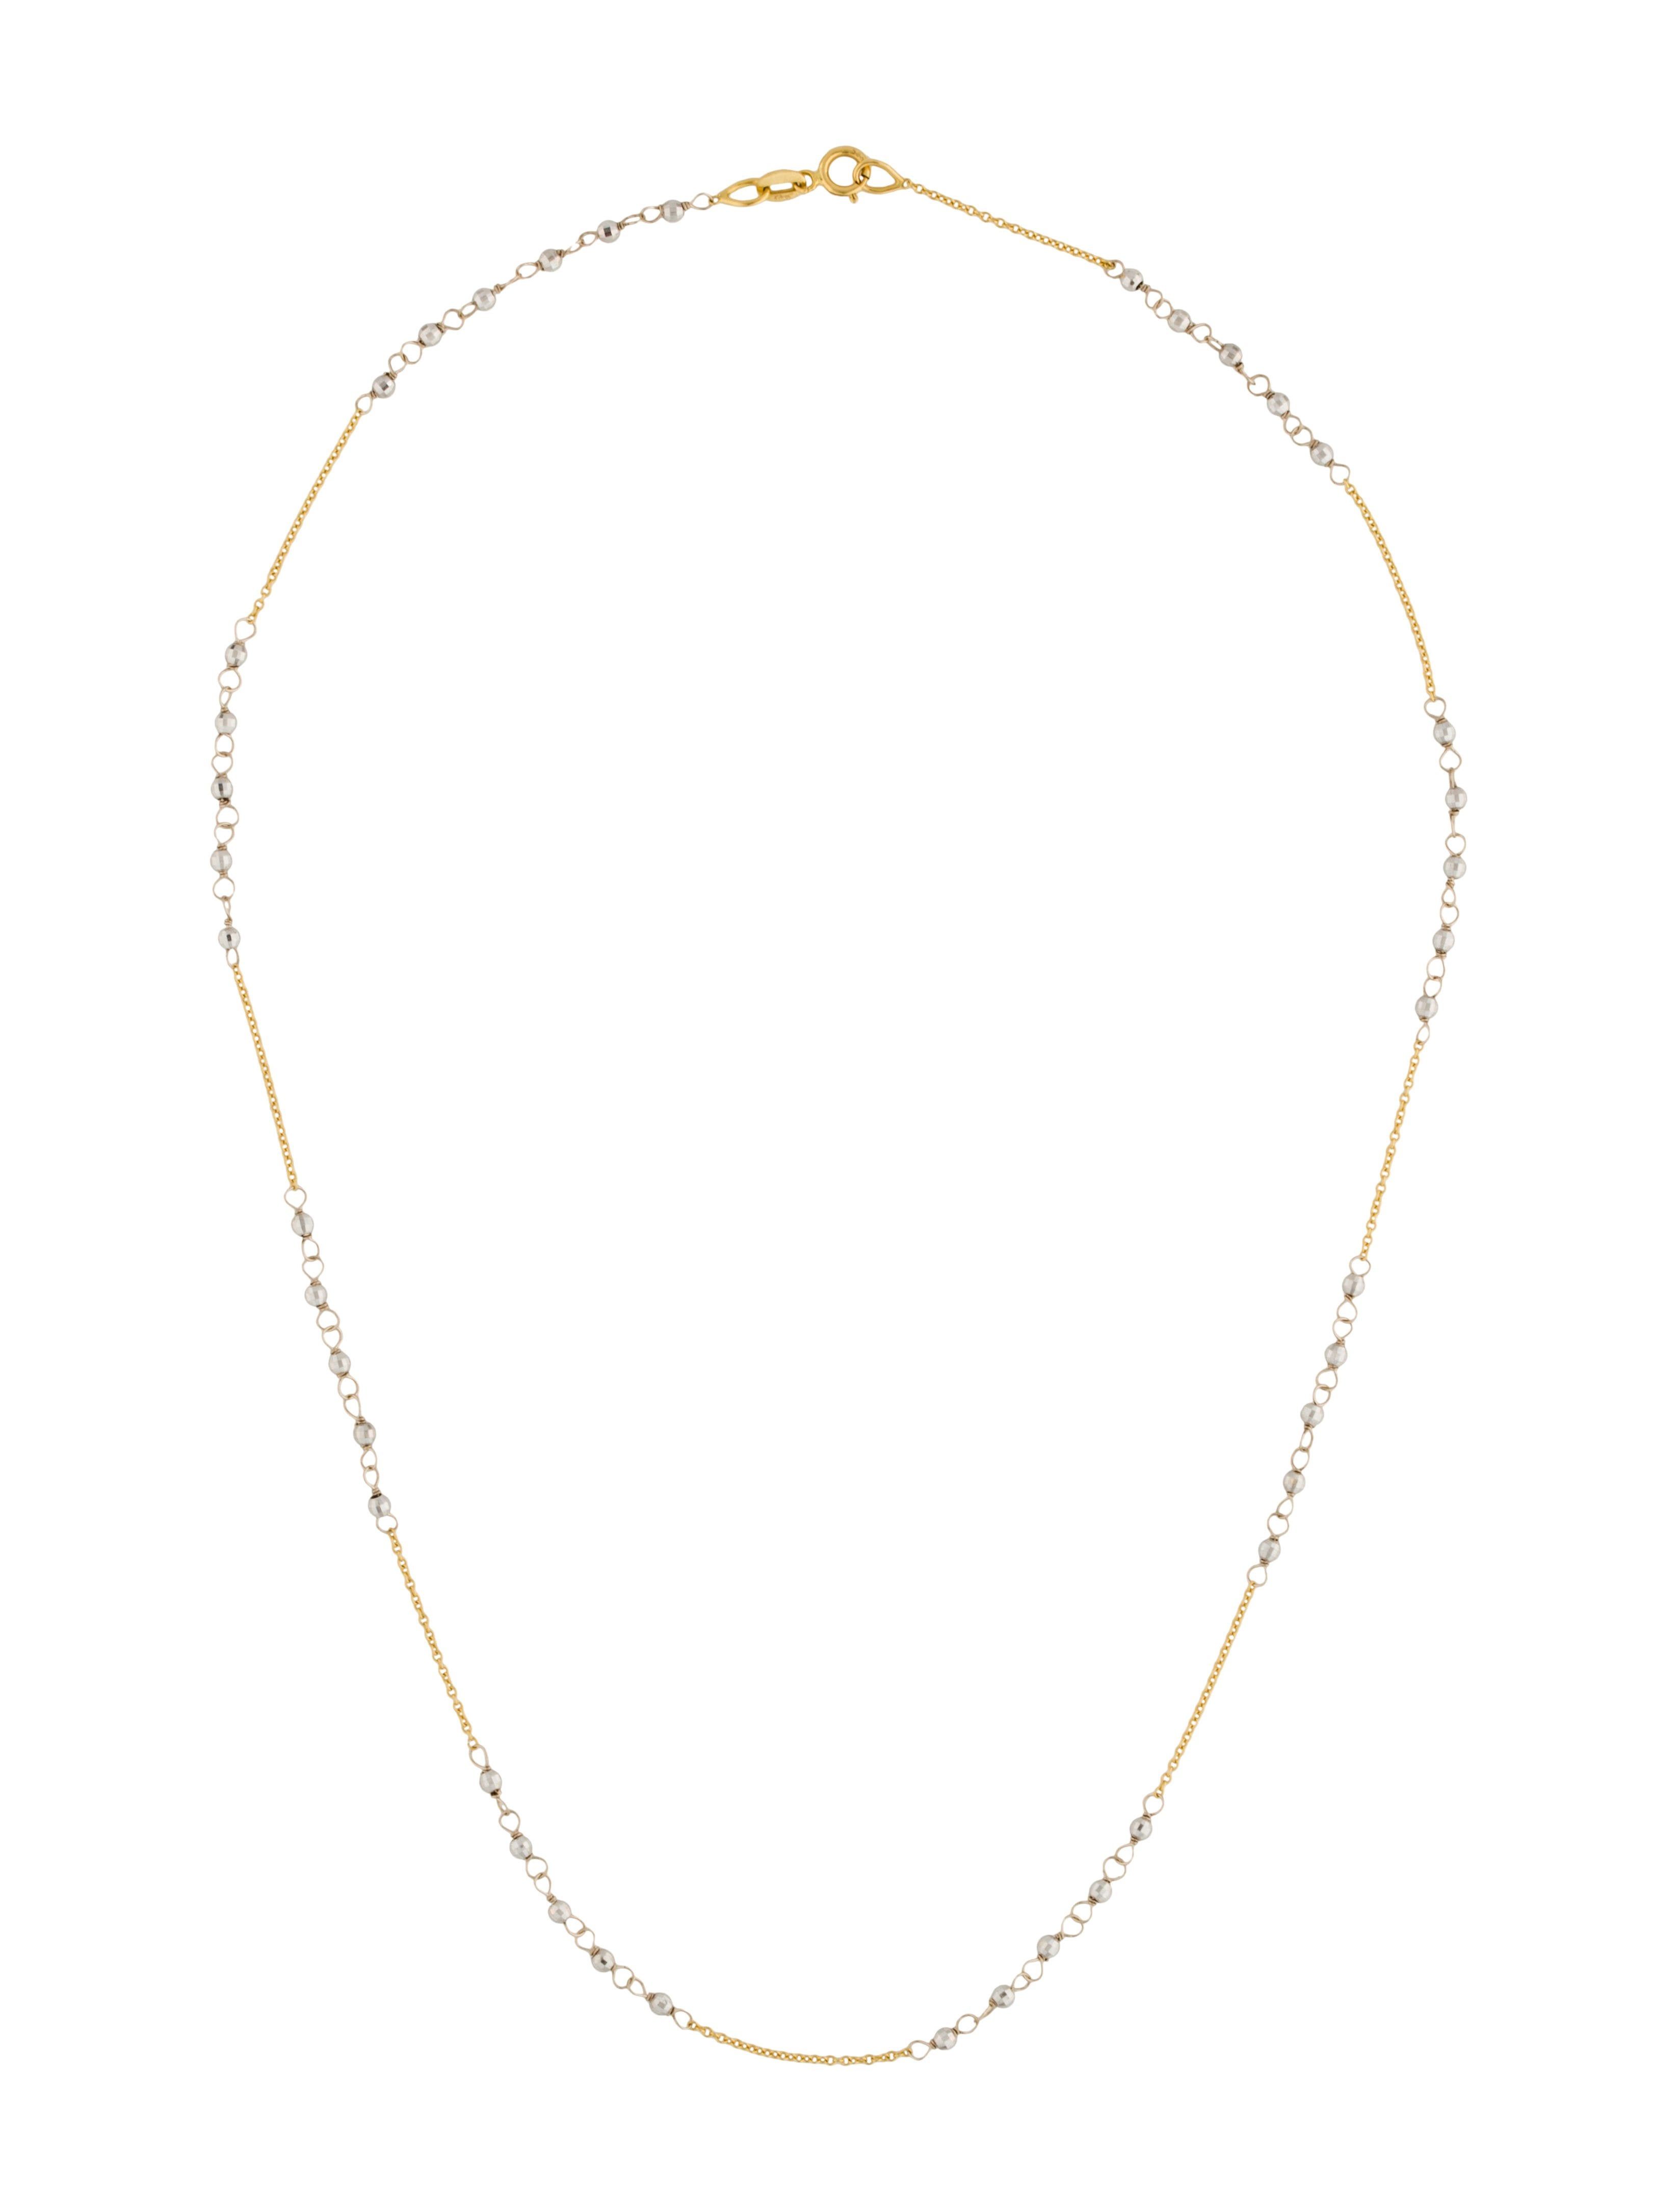 14k Two Tone Beaded Chain Intended For Most Recently Released Beaded Chain Necklaces (View 11 of 25)